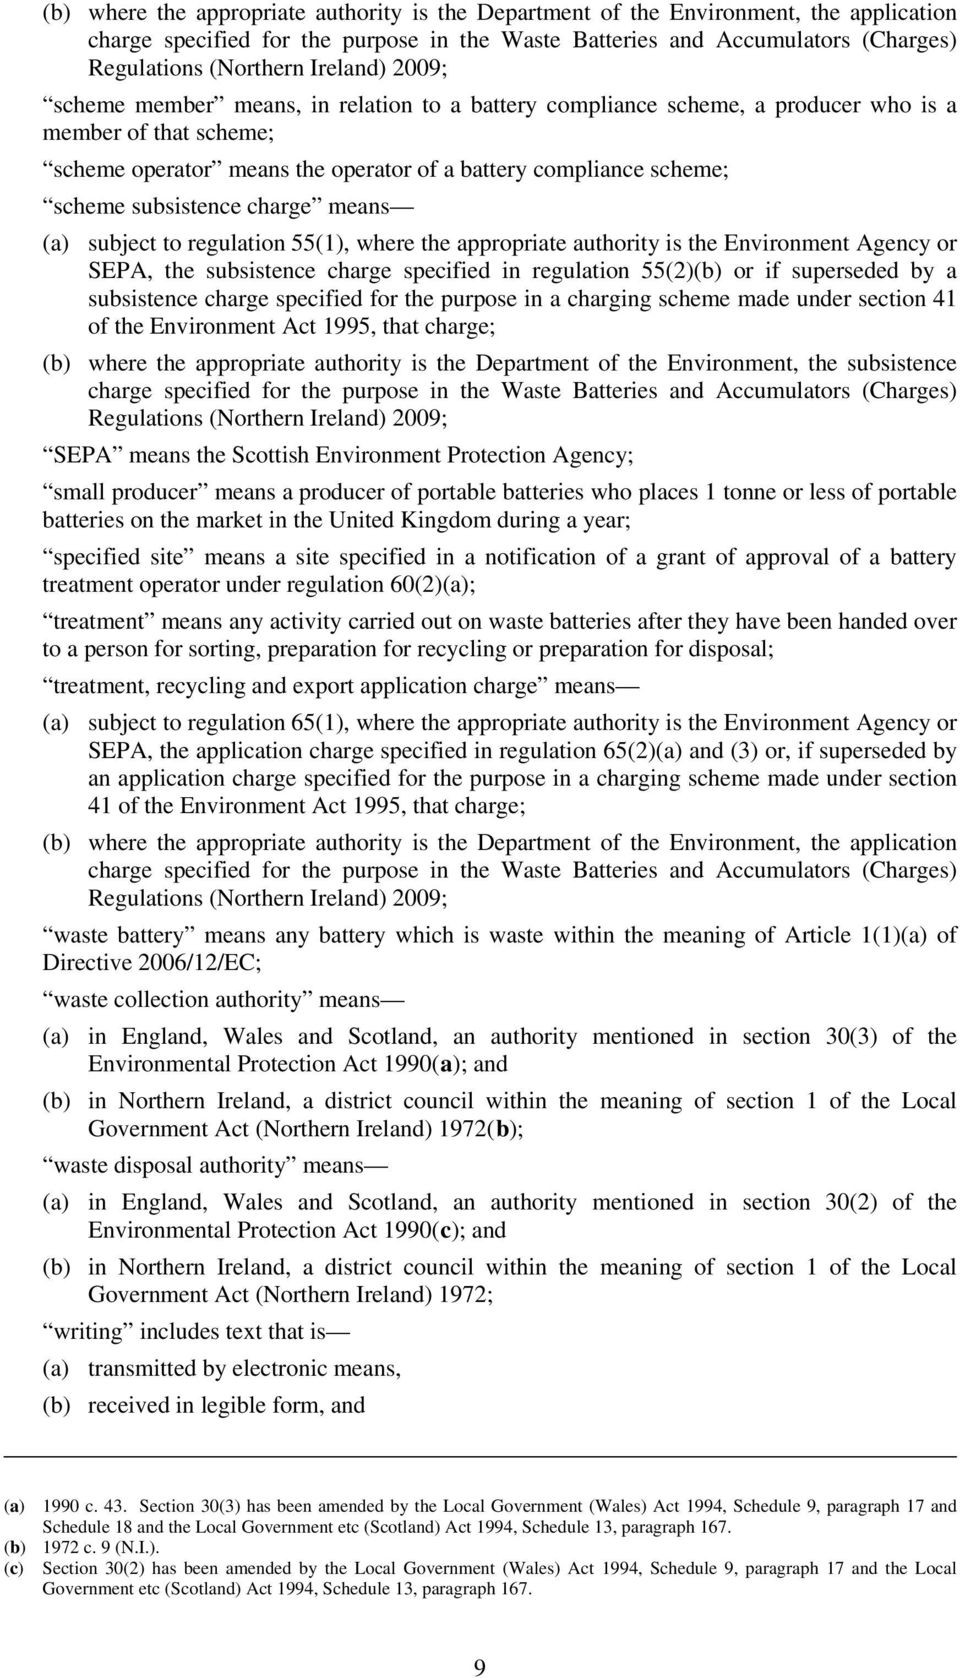 subsistence charge means (a) subject to regulation 55(1), where the appropriate authority is the Environment Agency or SEPA, the subsistence charge specified in regulation 55(2)(b) or if superseded